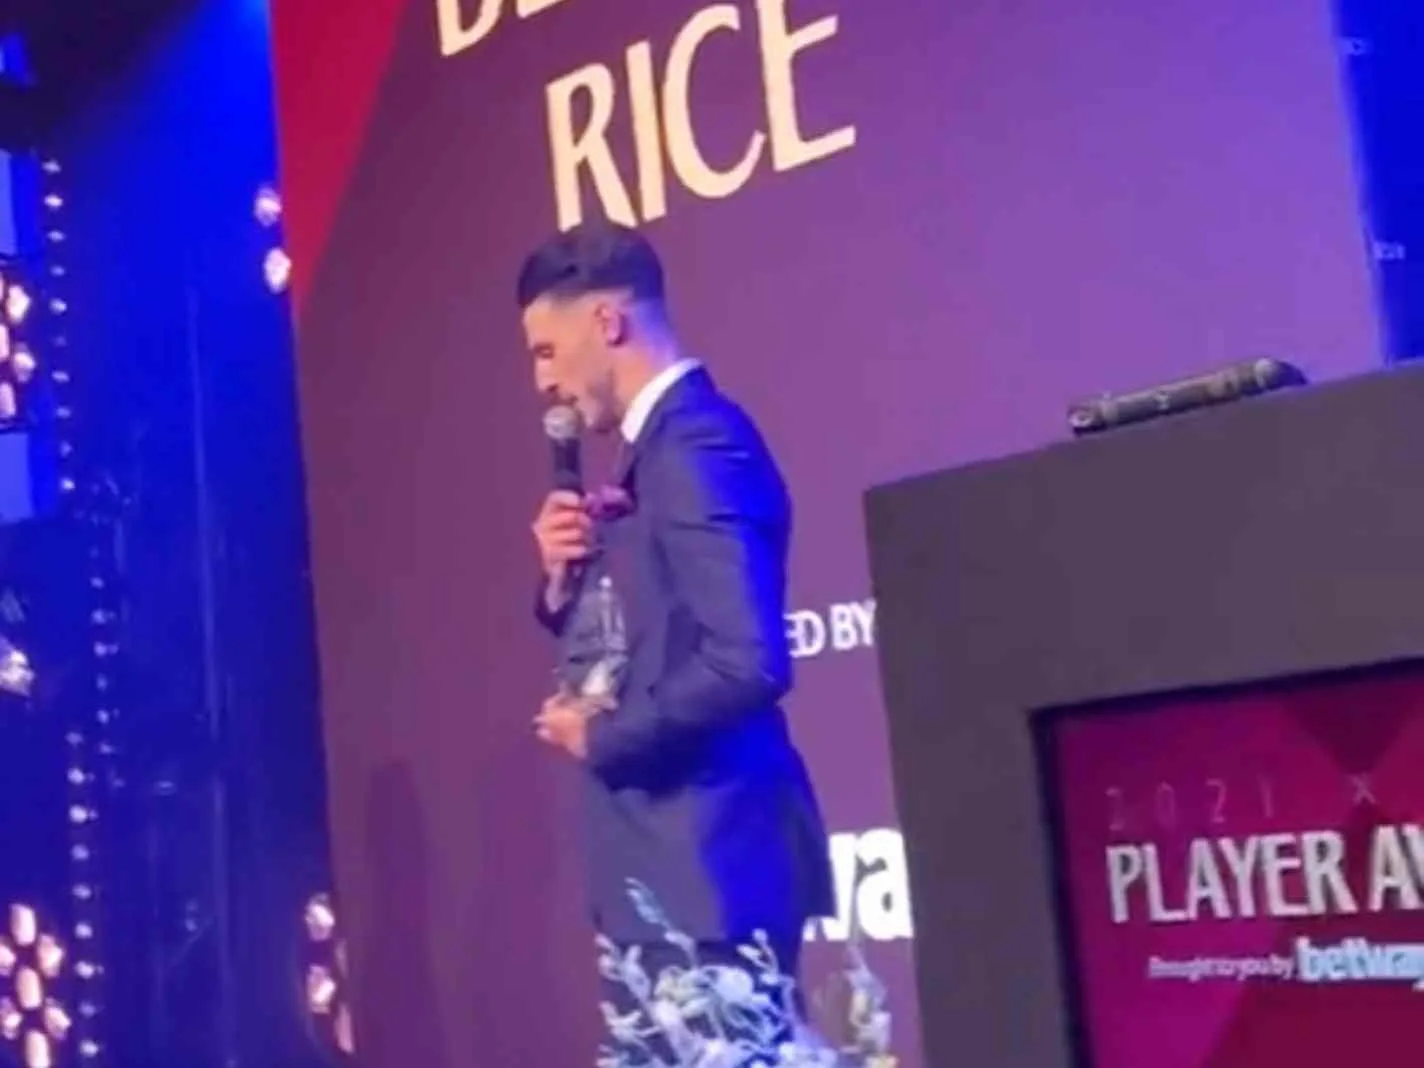 The image shows Declan Rice addressing the audience during Hammer of the Year awards.